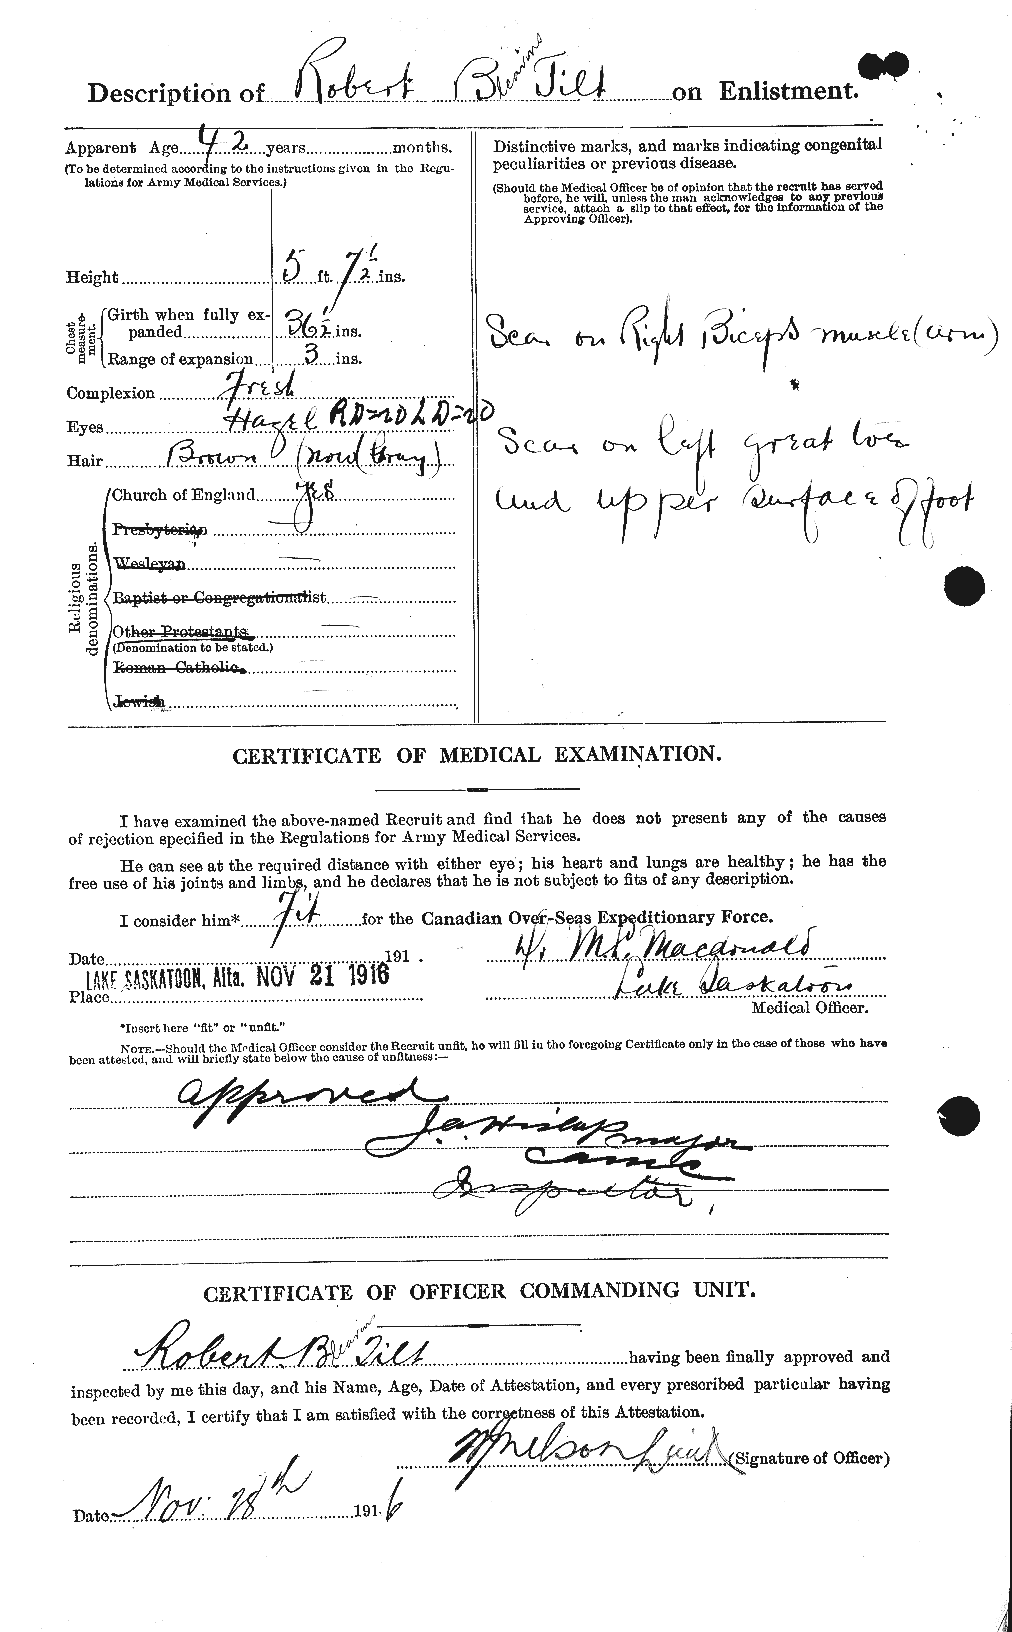 Personnel Records of the First World War - CEF 639753b